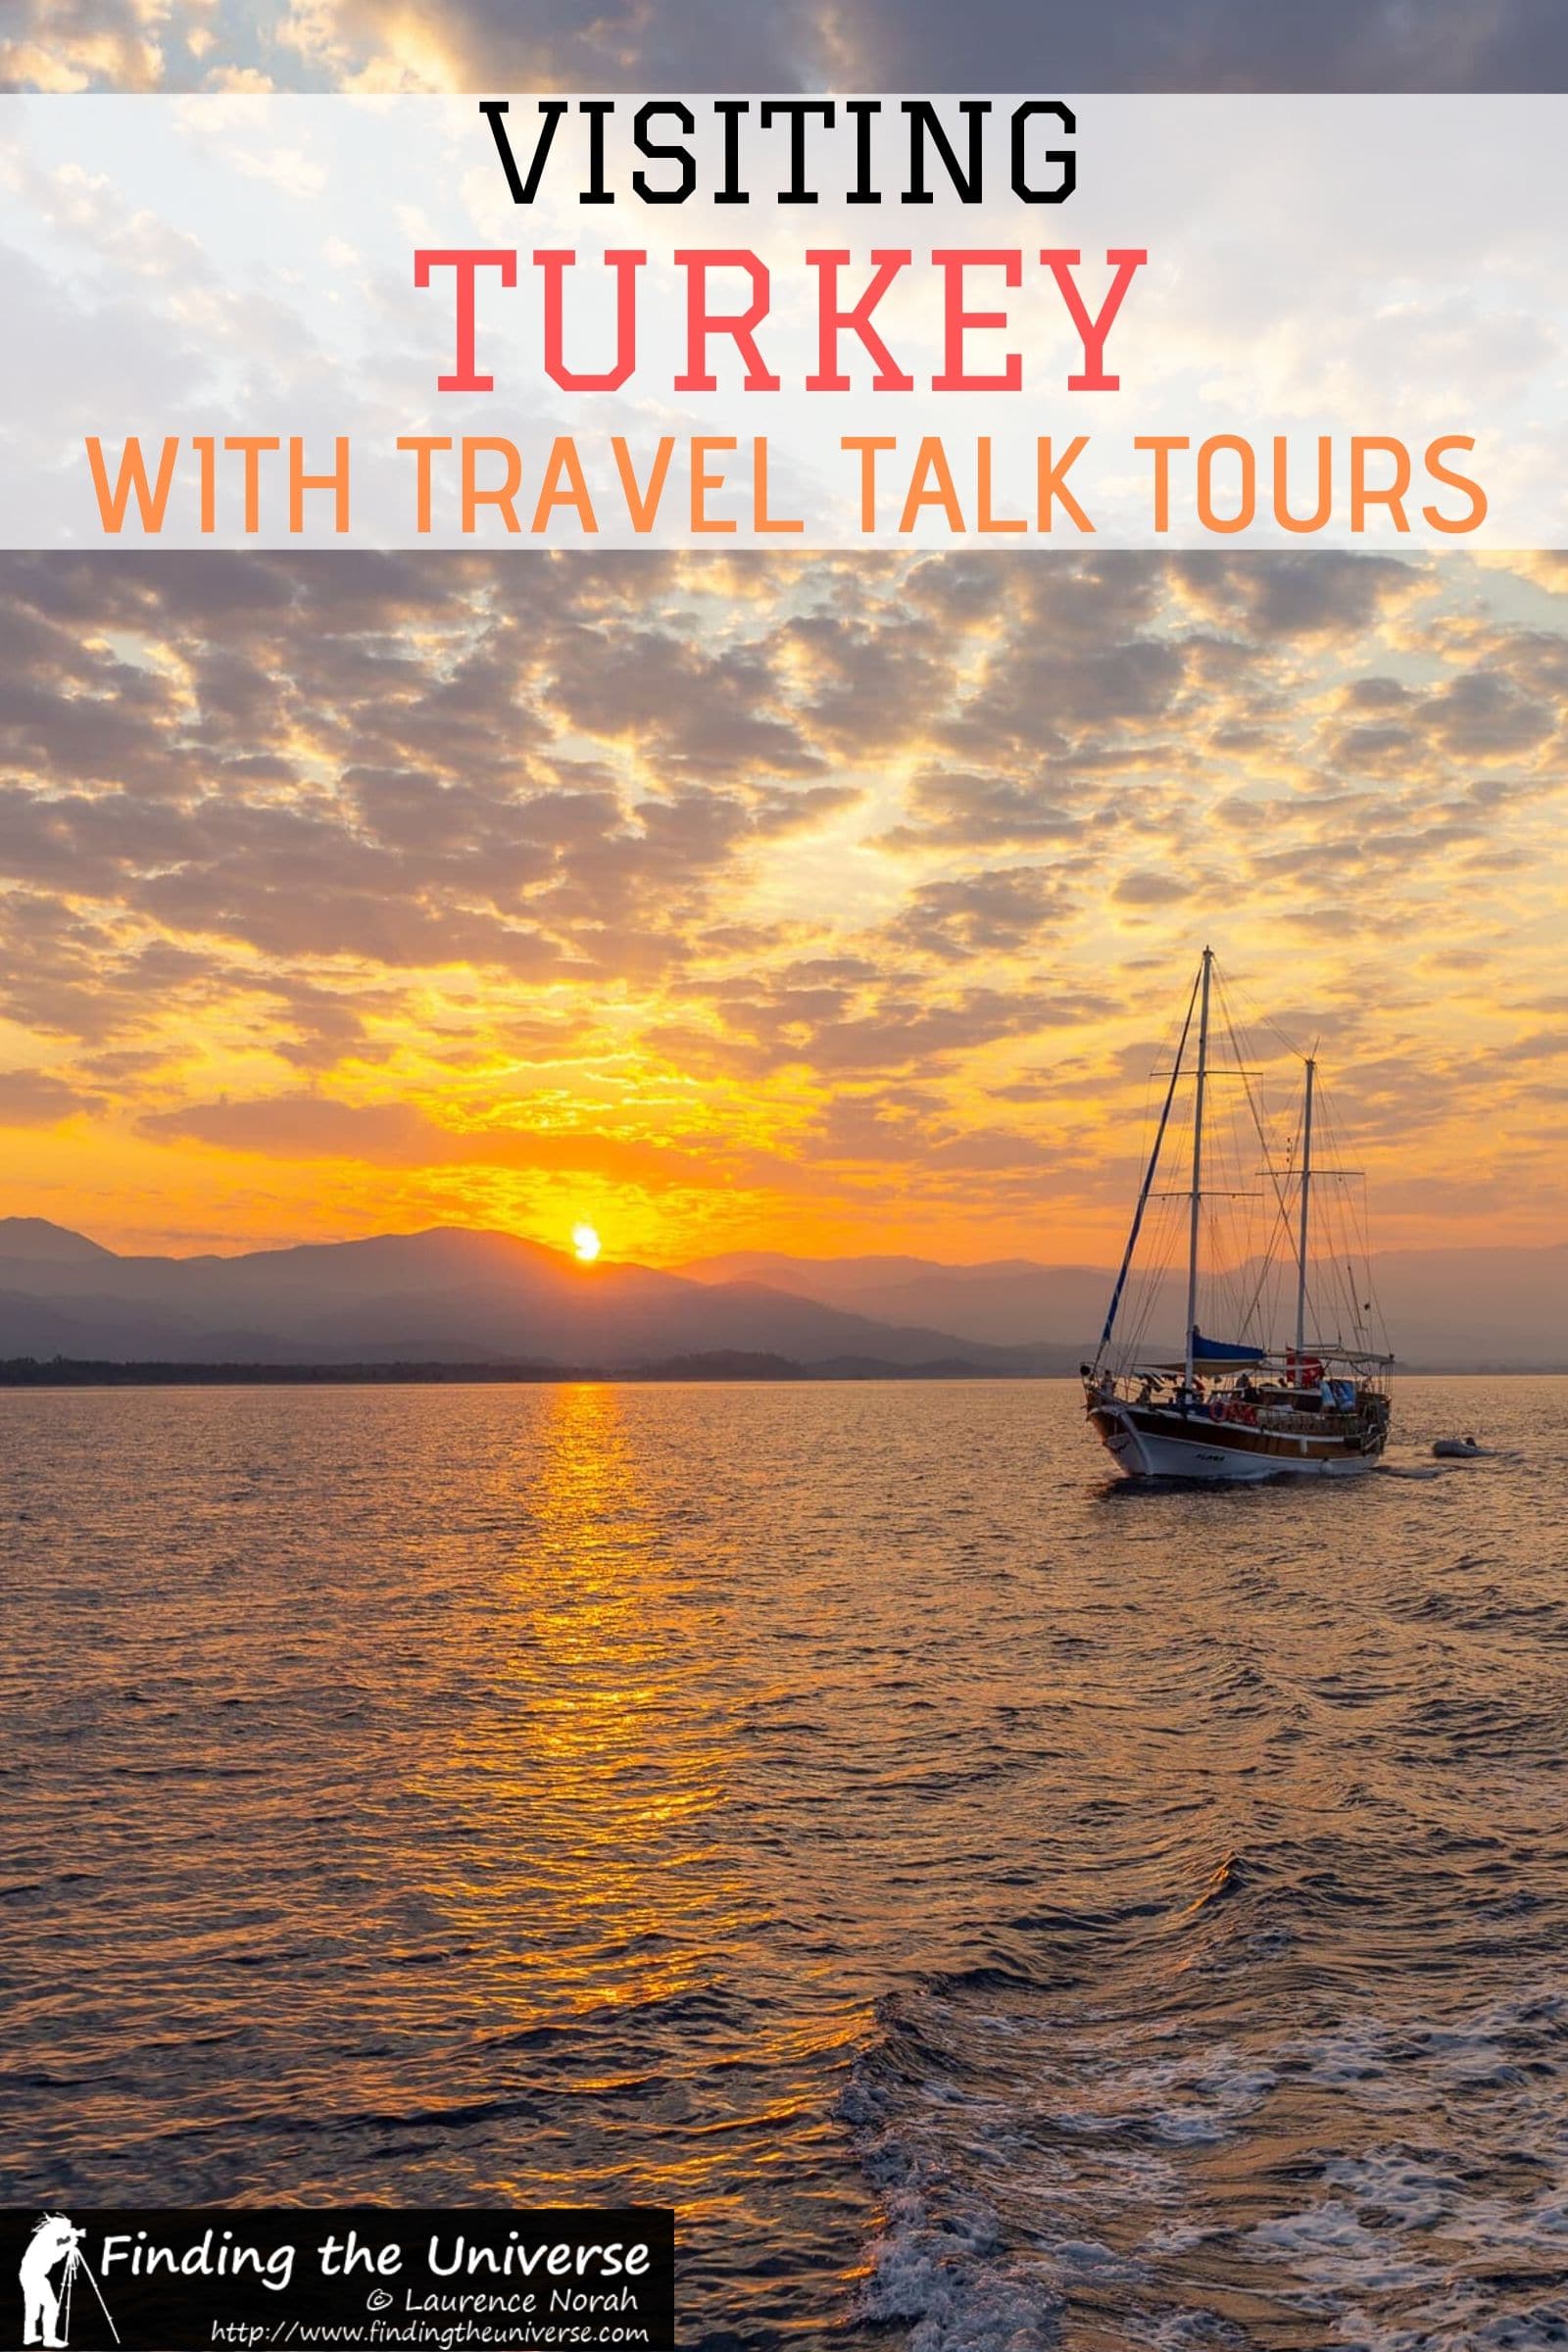 A Full review of a Turkey tour with Travel Talk Tours, including what the food is like, who the tour is for, accommodation, and more